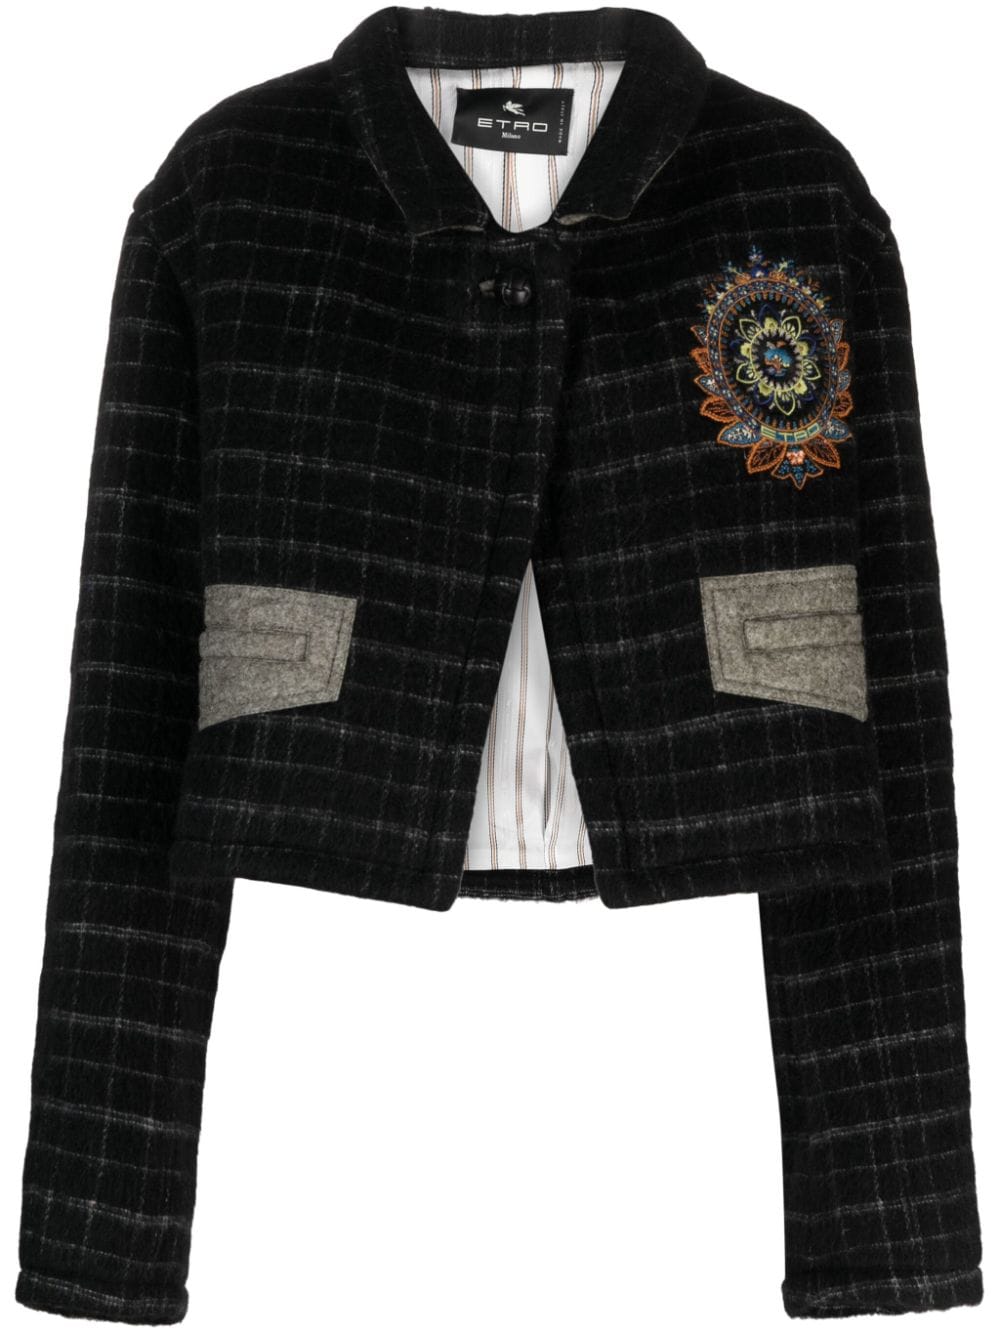 Shop Etro Floral Embroidered Cropped Jacket In Black Wool Blend For Women